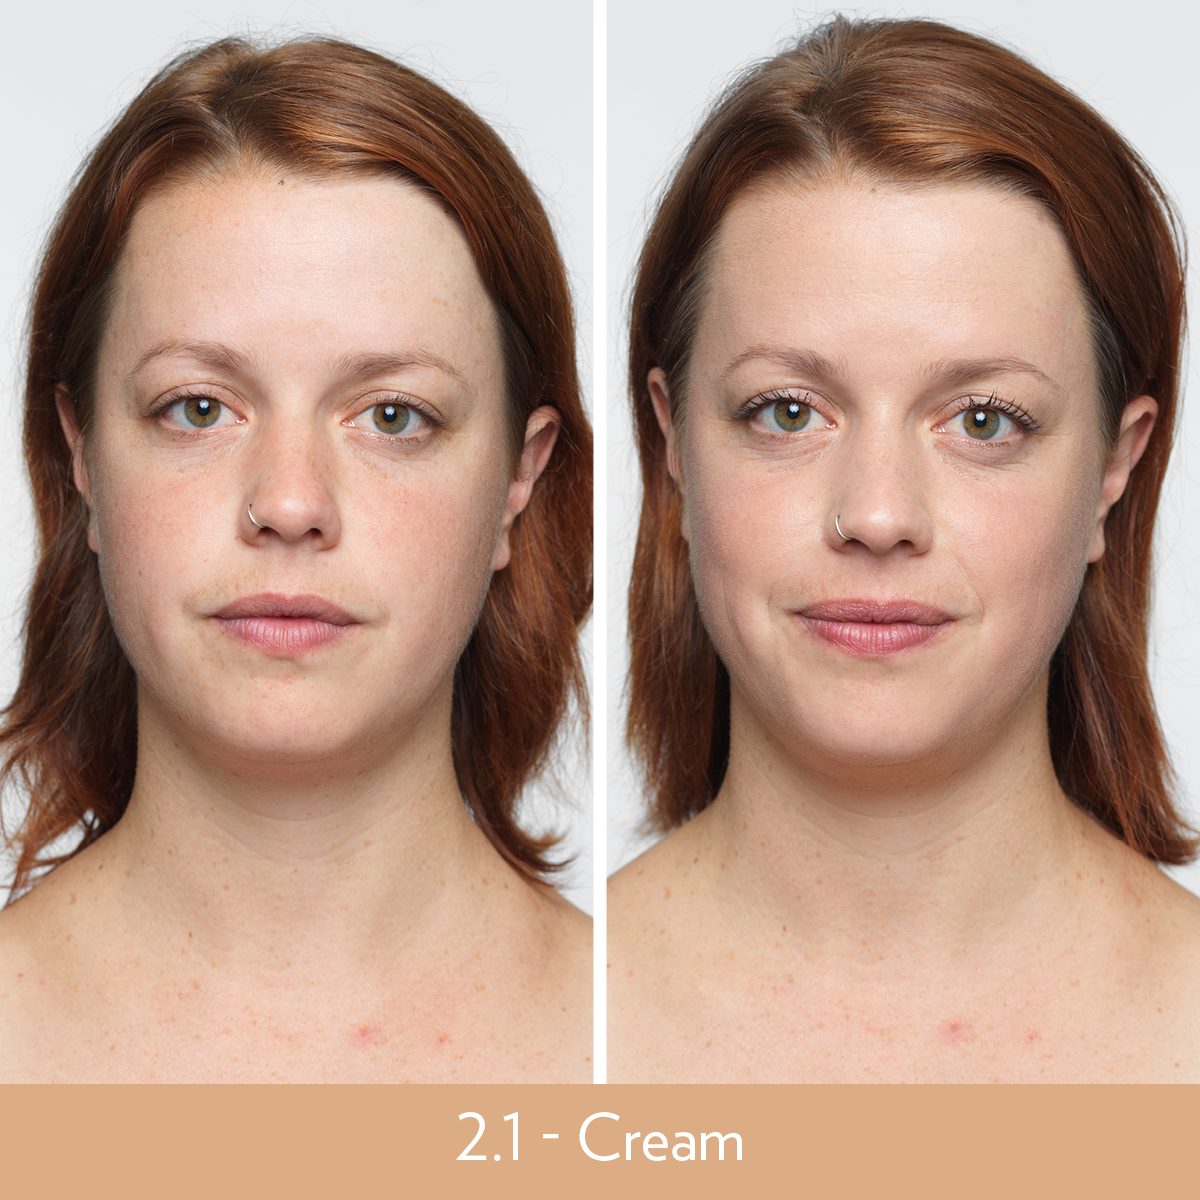 Nu Skin BB+ Skin Loving Foundation 2.1 Cream Before and After